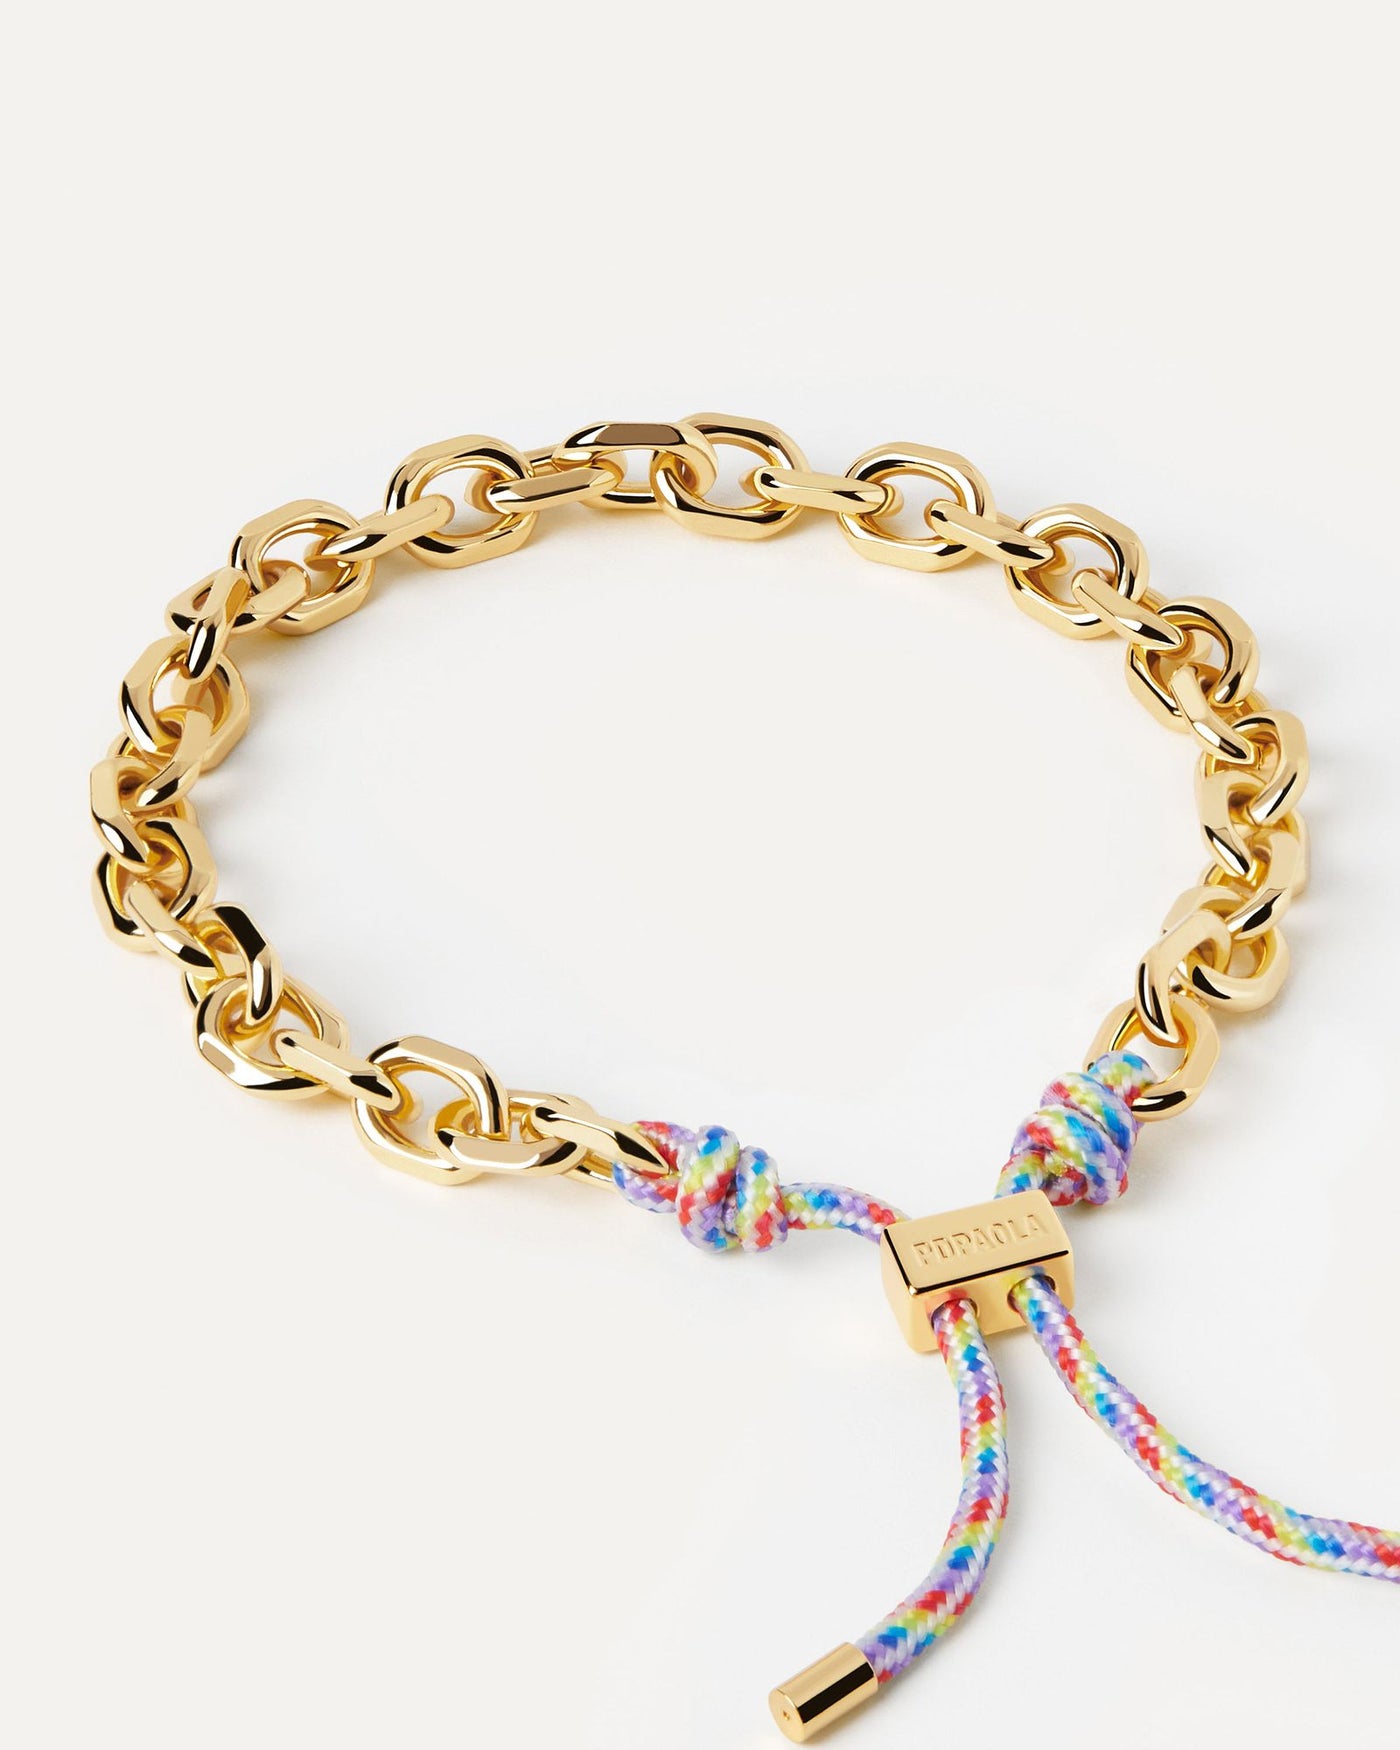 2024 Selection | Prisma Essential Rope and Chain Bracelet. Silver chain bracelet with interwined multicolor rope and adjustable sliding clasp. Get the latest arrival from PDPAOLA. Place your order safely and get this Best Seller. Free Shipping.